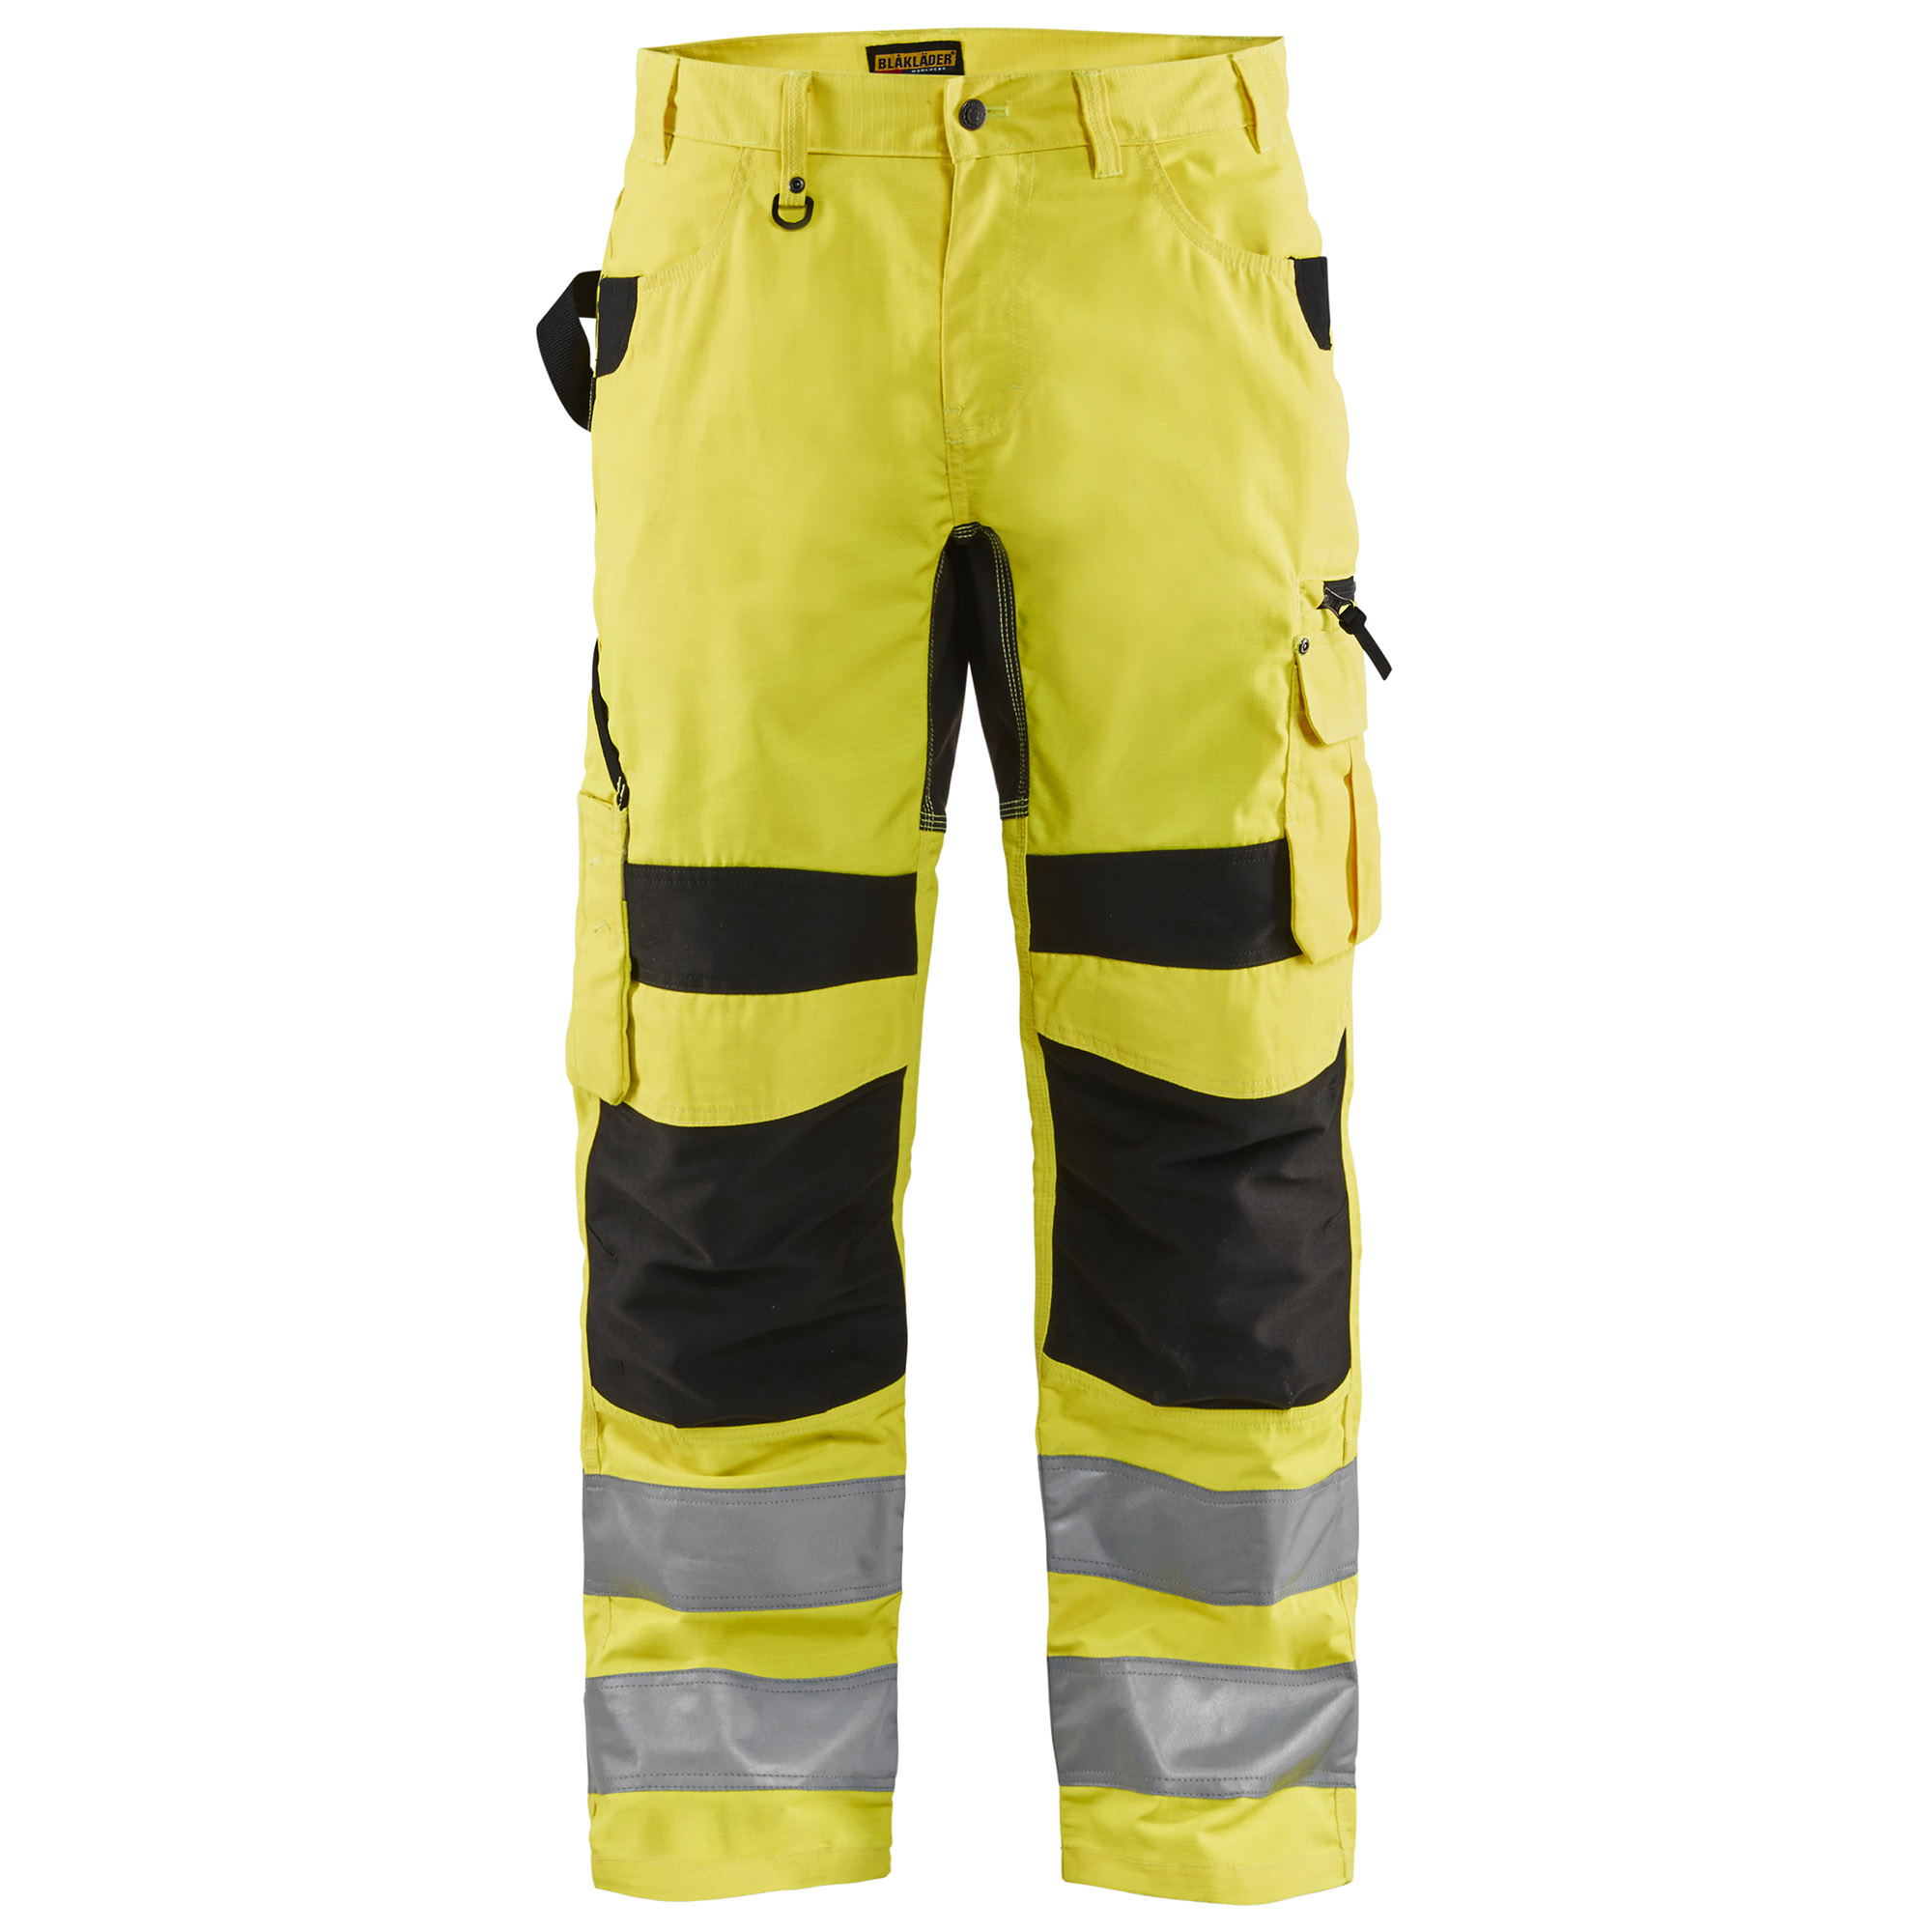 Details about   Mens Hi Viz Padded Work Trouser High Visibility Safety Elasticated Over Pants 